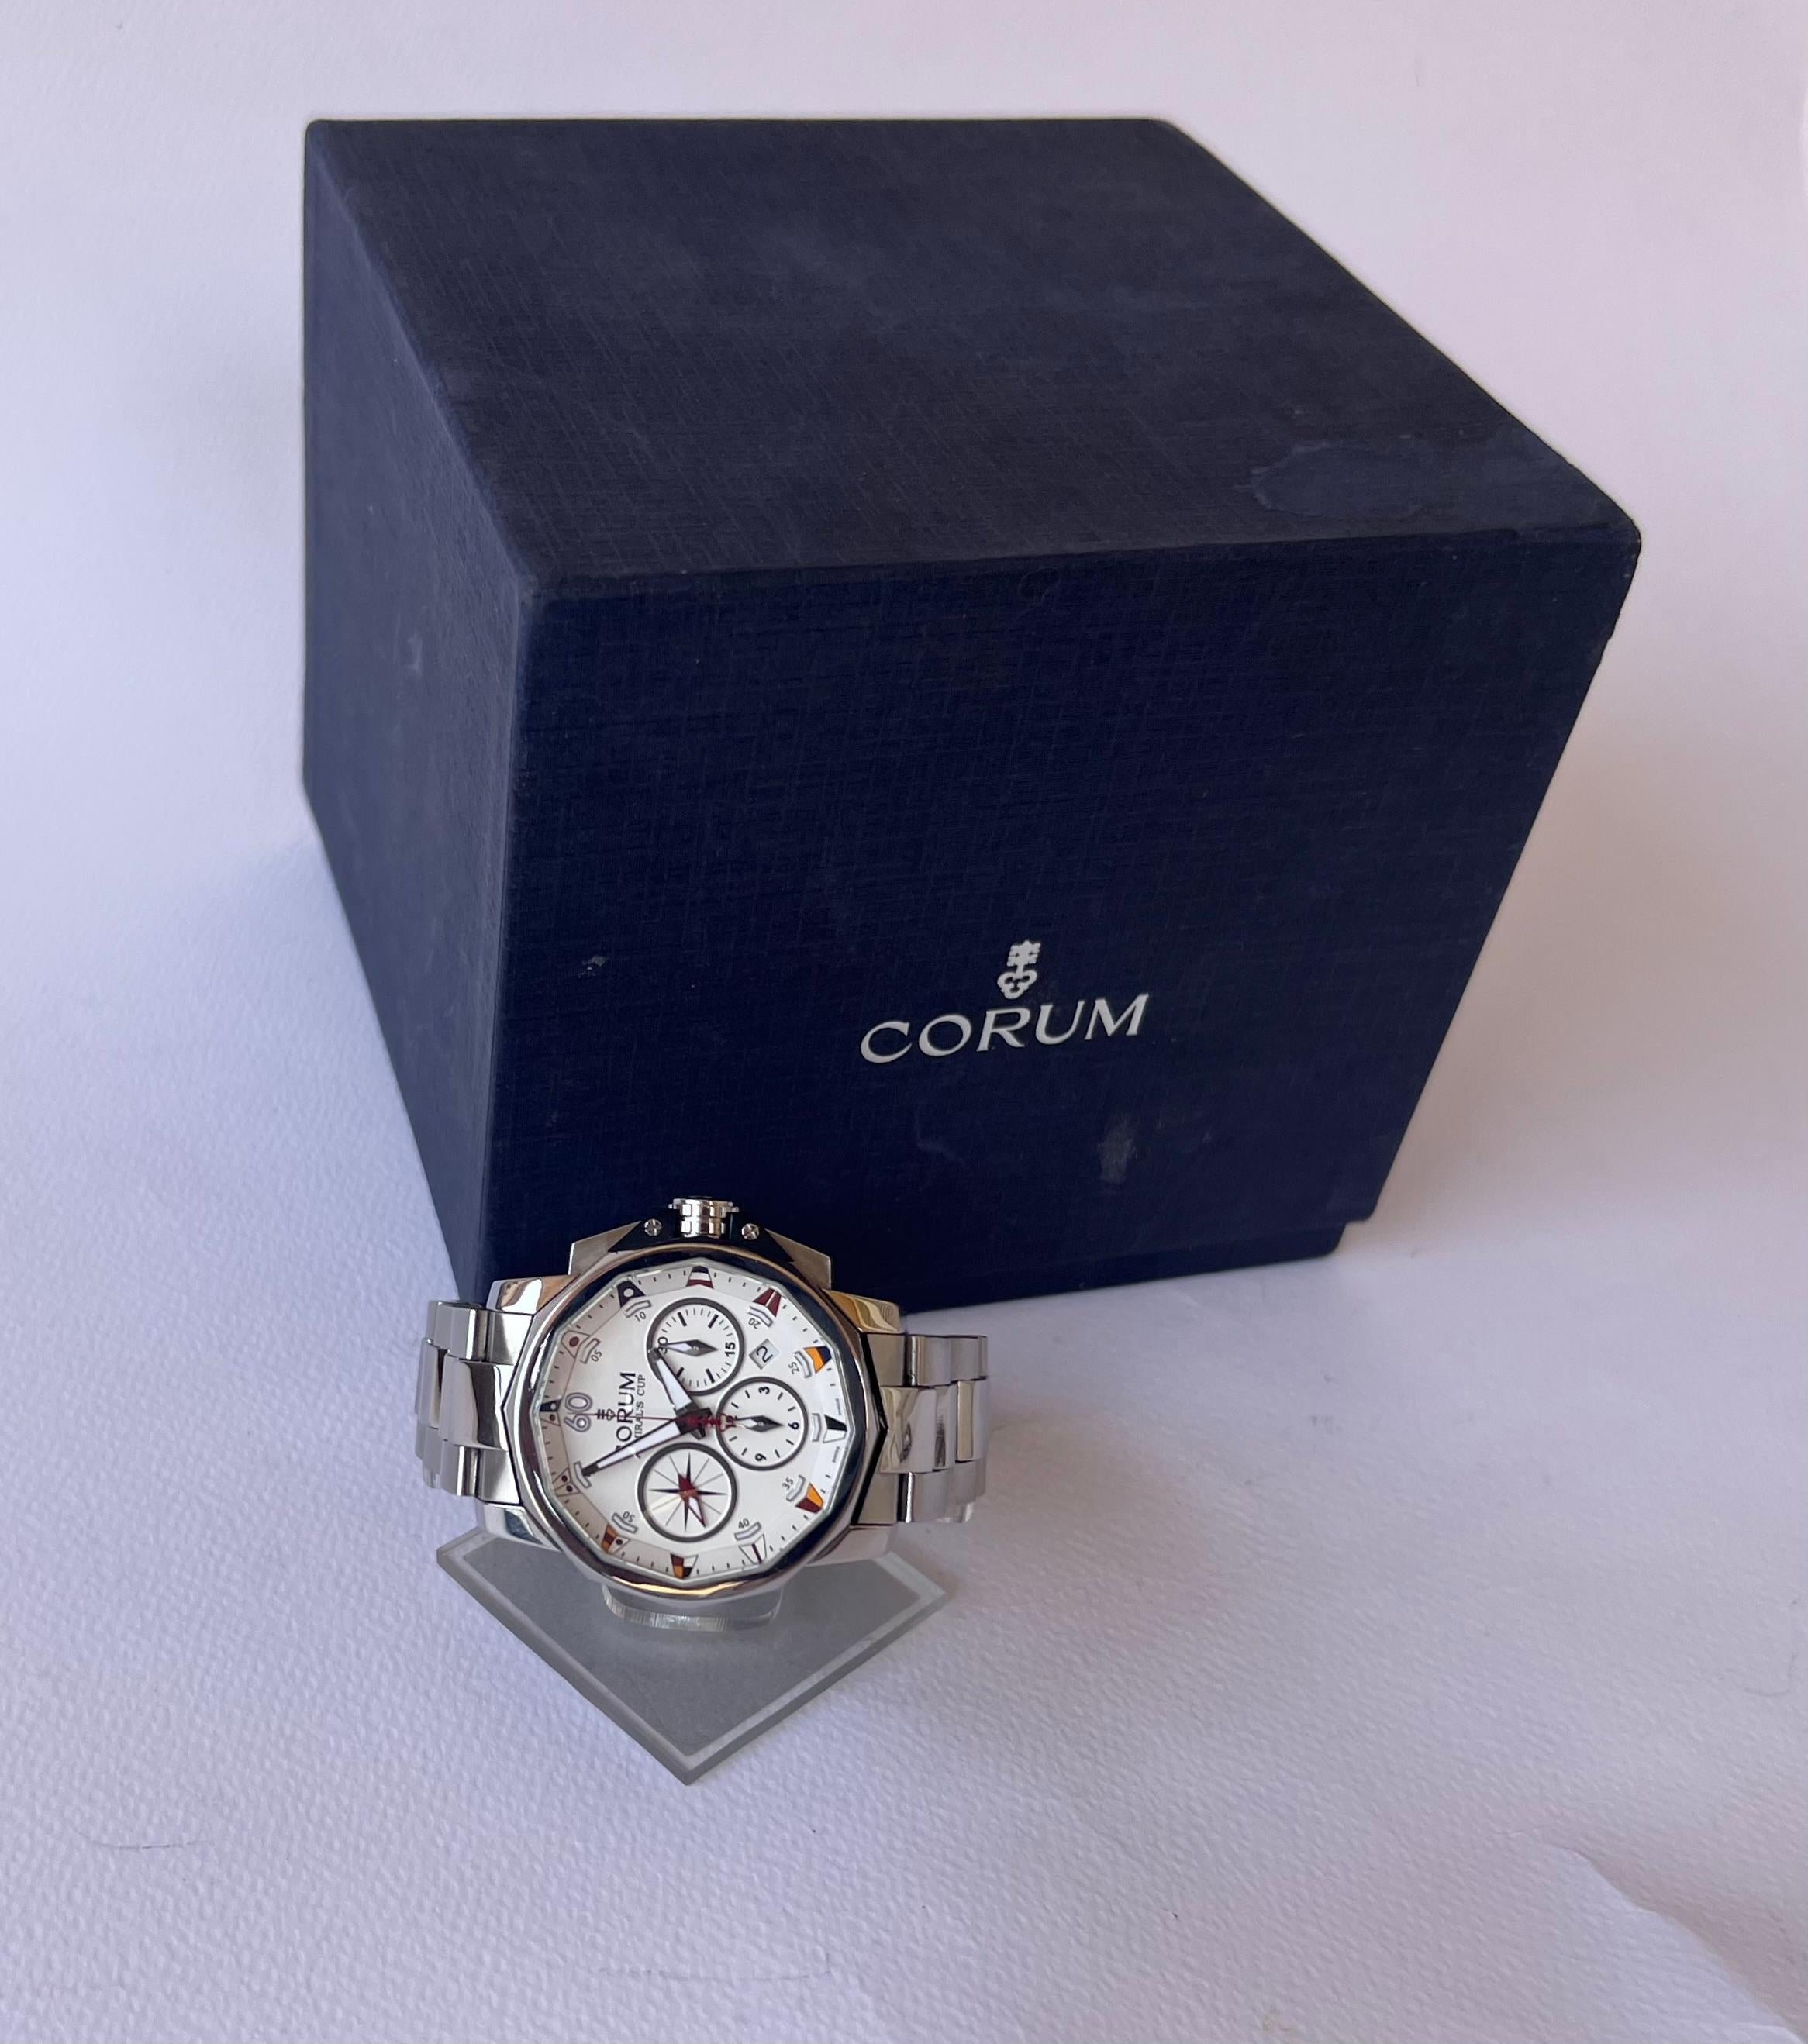 Brand : Corum

Model: Admirals Cup

Reference Number : 01.0007

Features : Chronograph - Stainless Steel

Country Of Manufacture: Switzerland

Movement: Automatic

Measurements : 44 mm diameter (excluding crown )

Band Type : Stainless Steel

Band